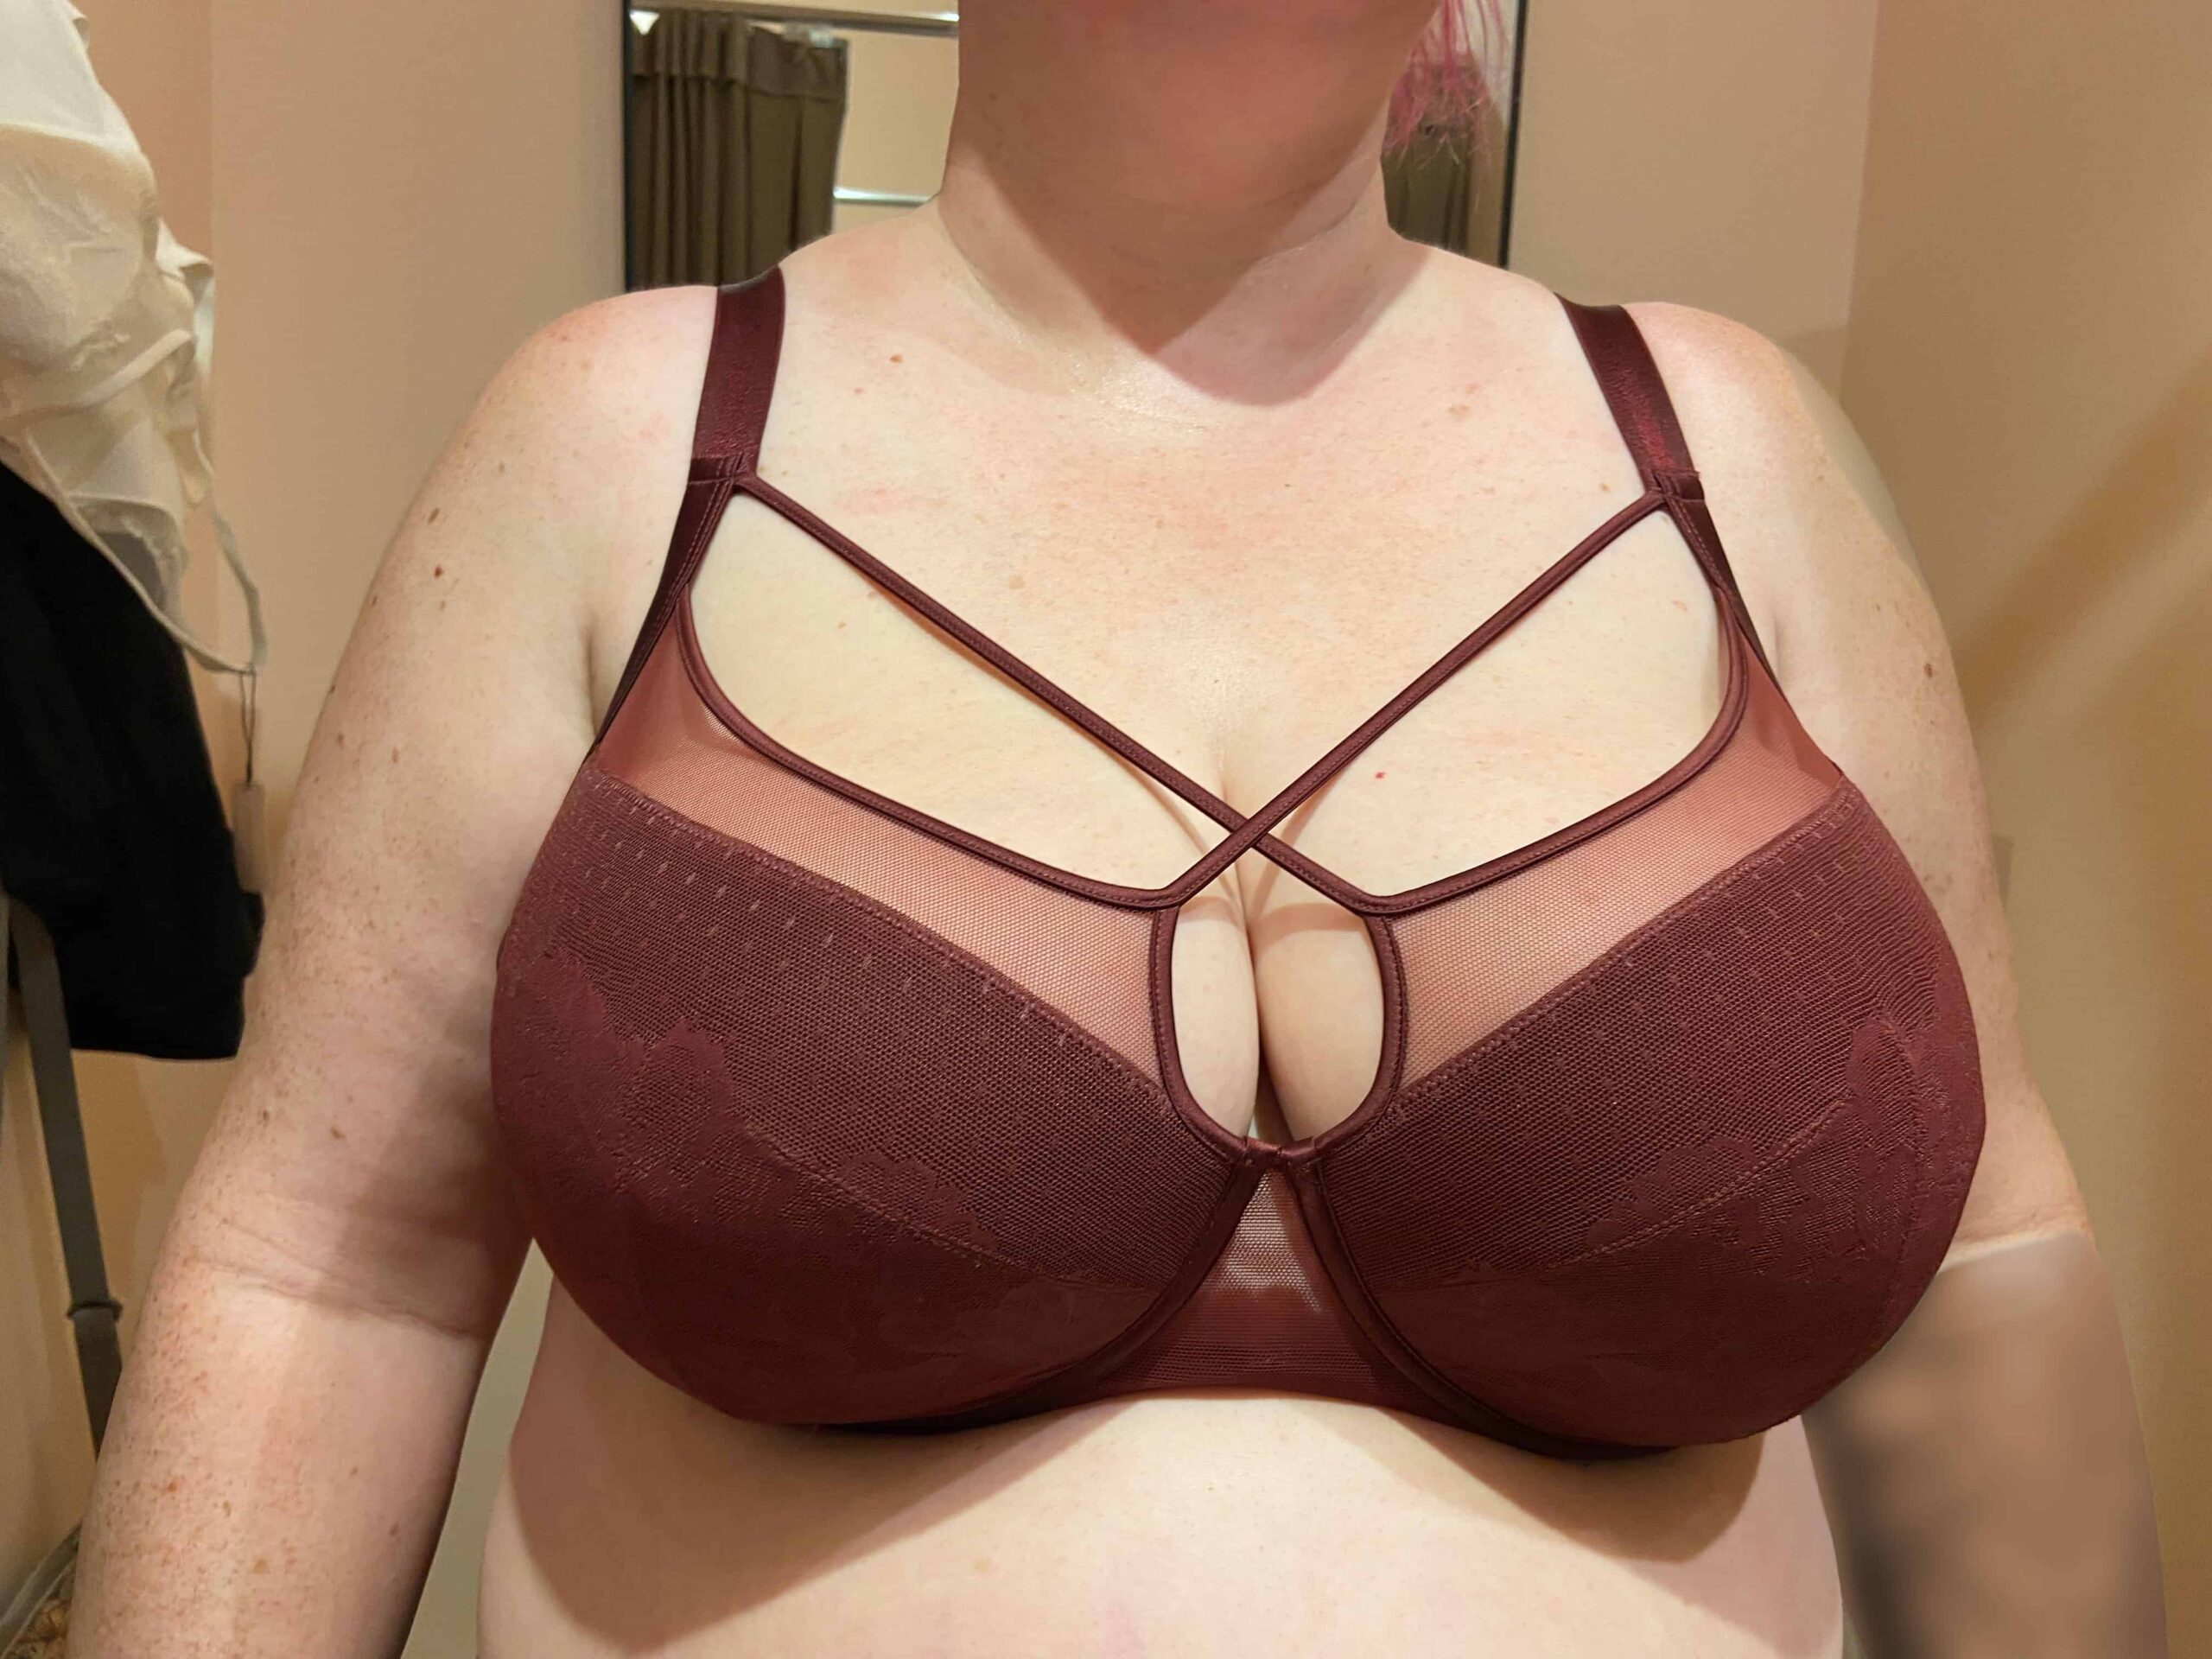 Pam wears Harper bra in 40G in the wine colour. This is a photo of the front on Pam